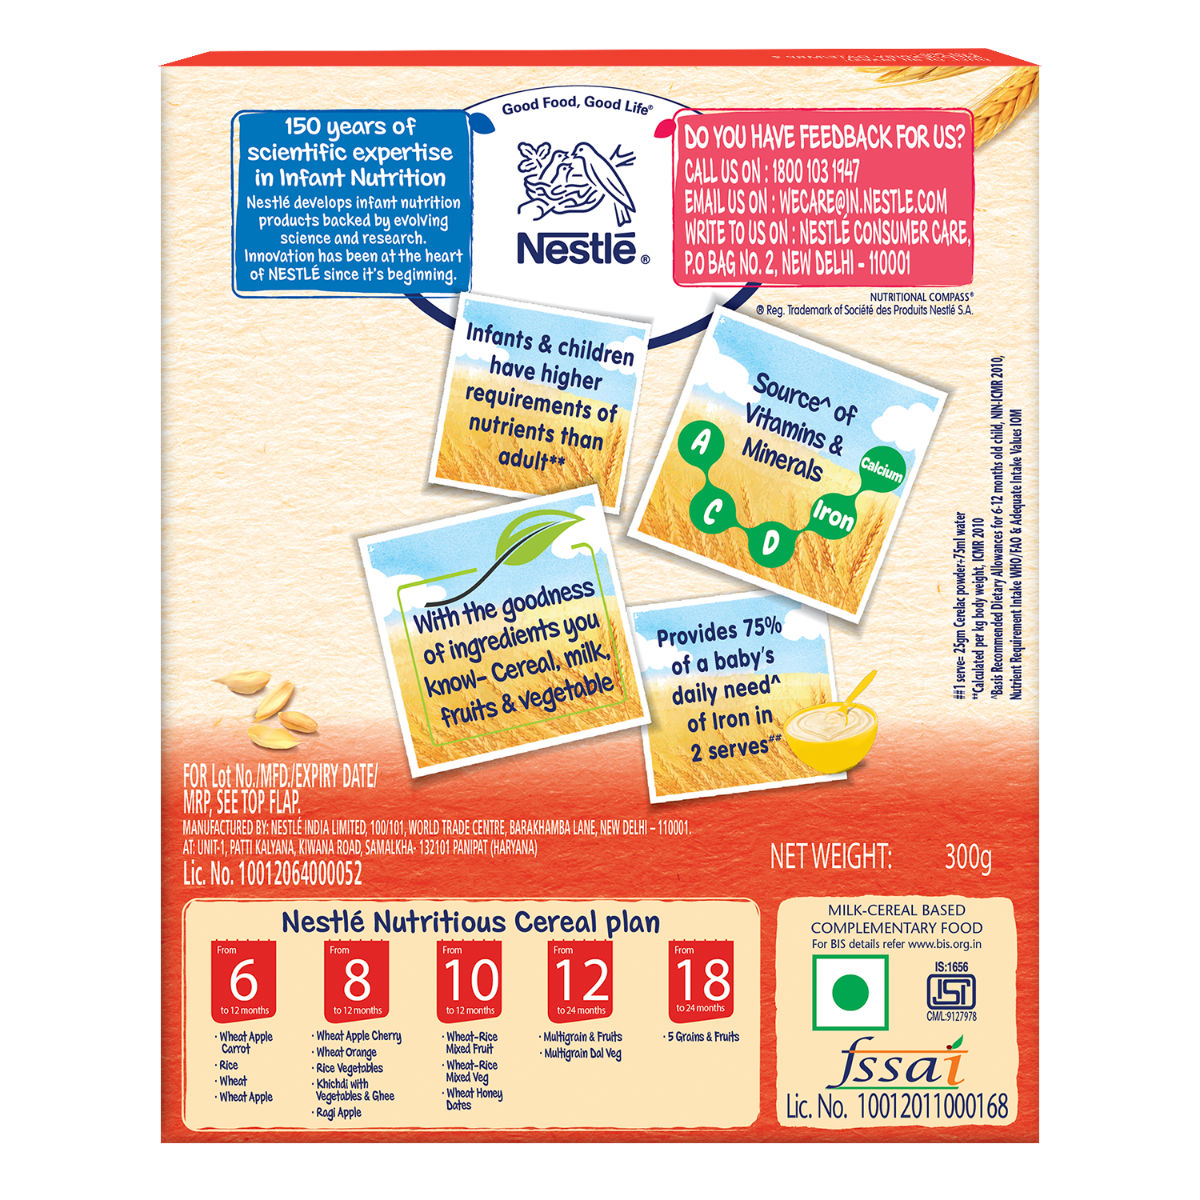 Nestle Cerelac Baby Cereal with Milk Apple Carrot Powder, 300 gm Refill Pack, Pack of 1 